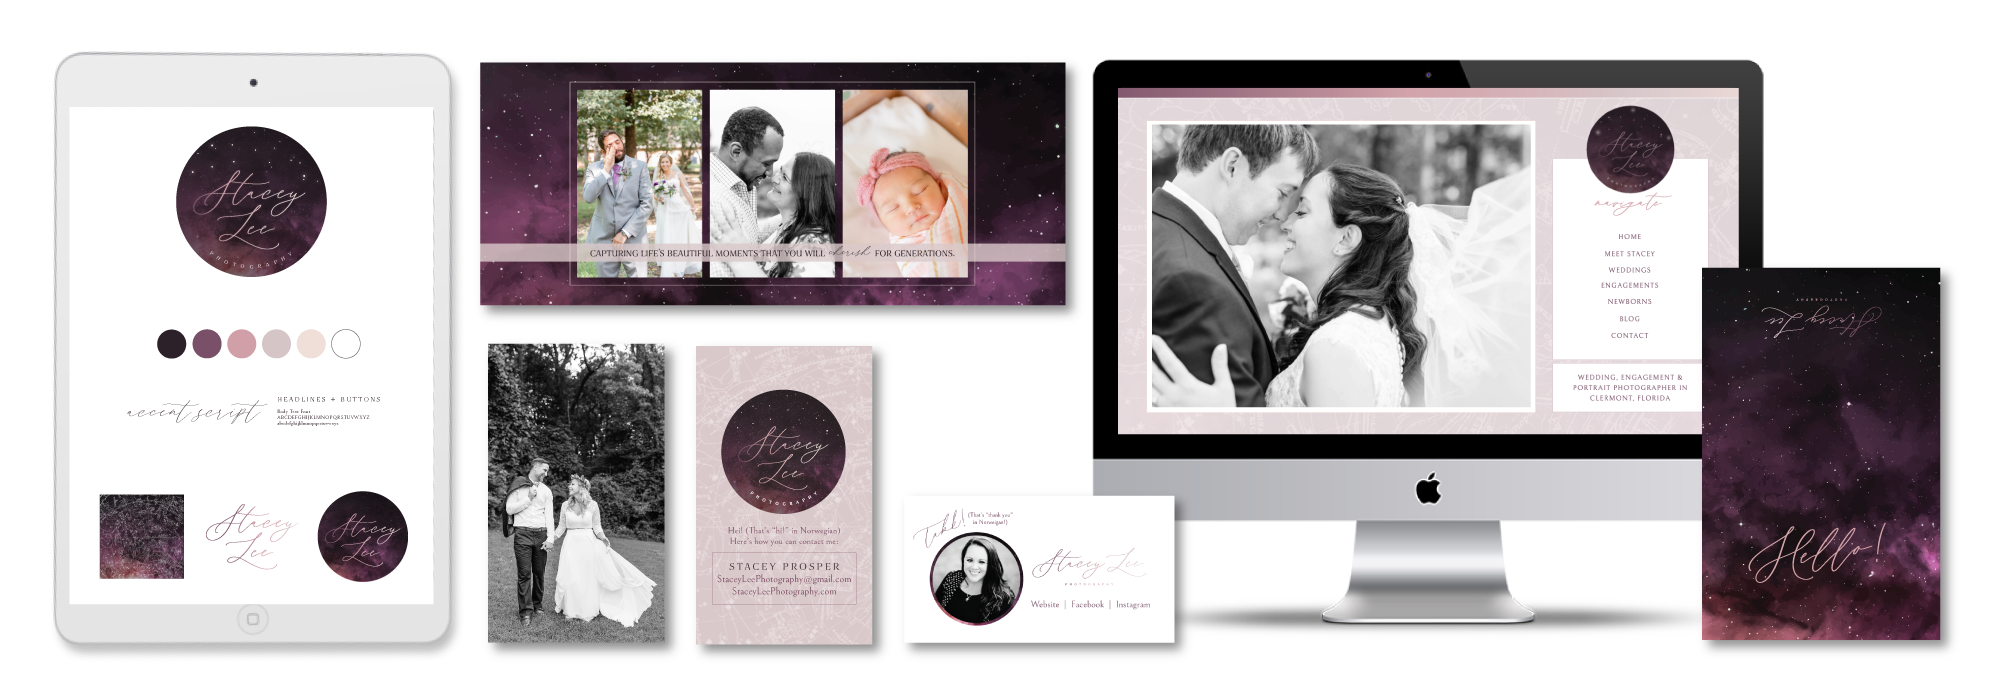 This is an colorful wedding and newborn photography brand and Showit Website for Stacey Lee Photography